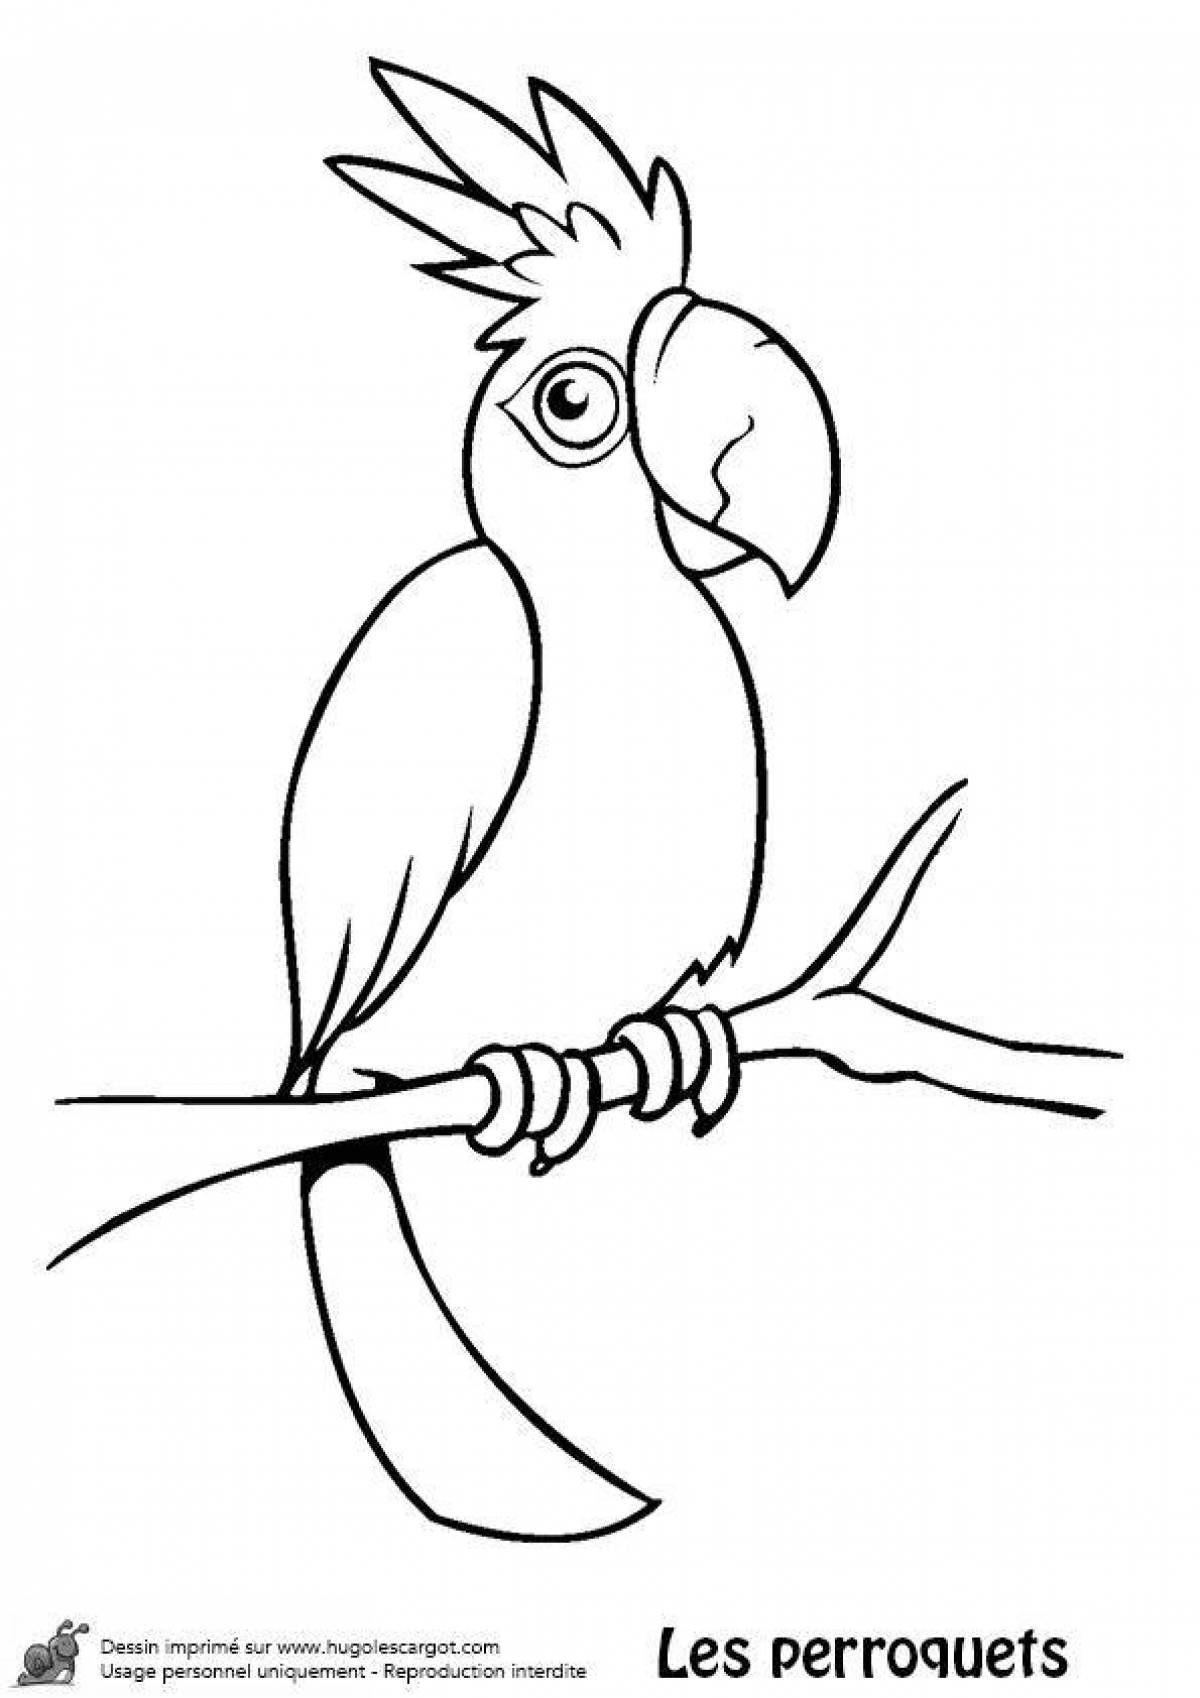 Colouring parrot for kids